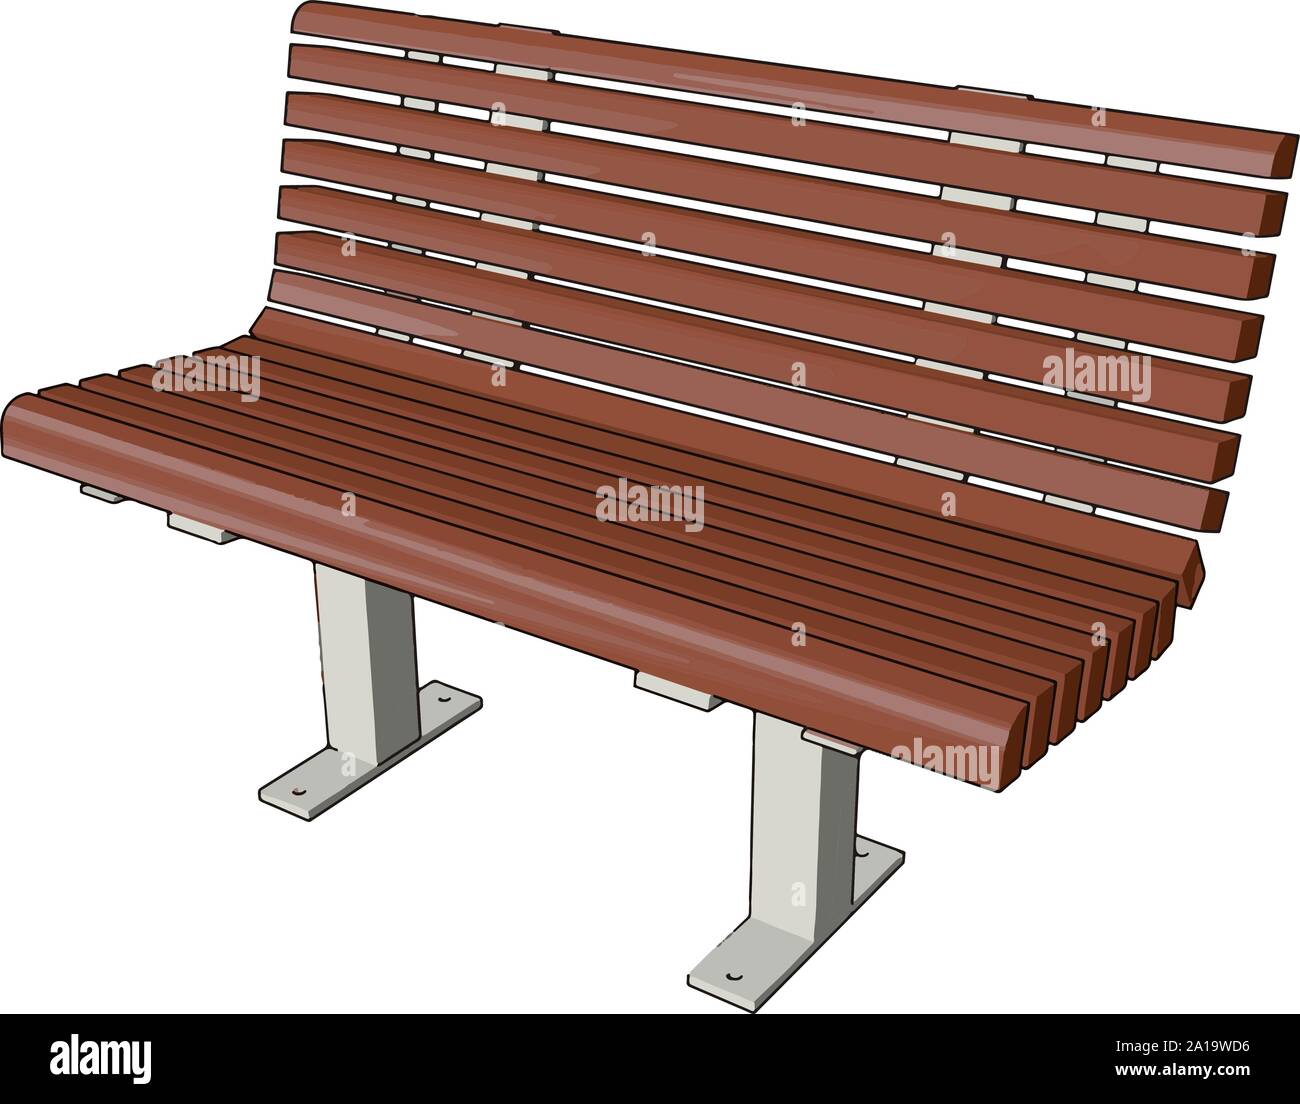 Brown bench, illustration, vector on white background. Stock Vector